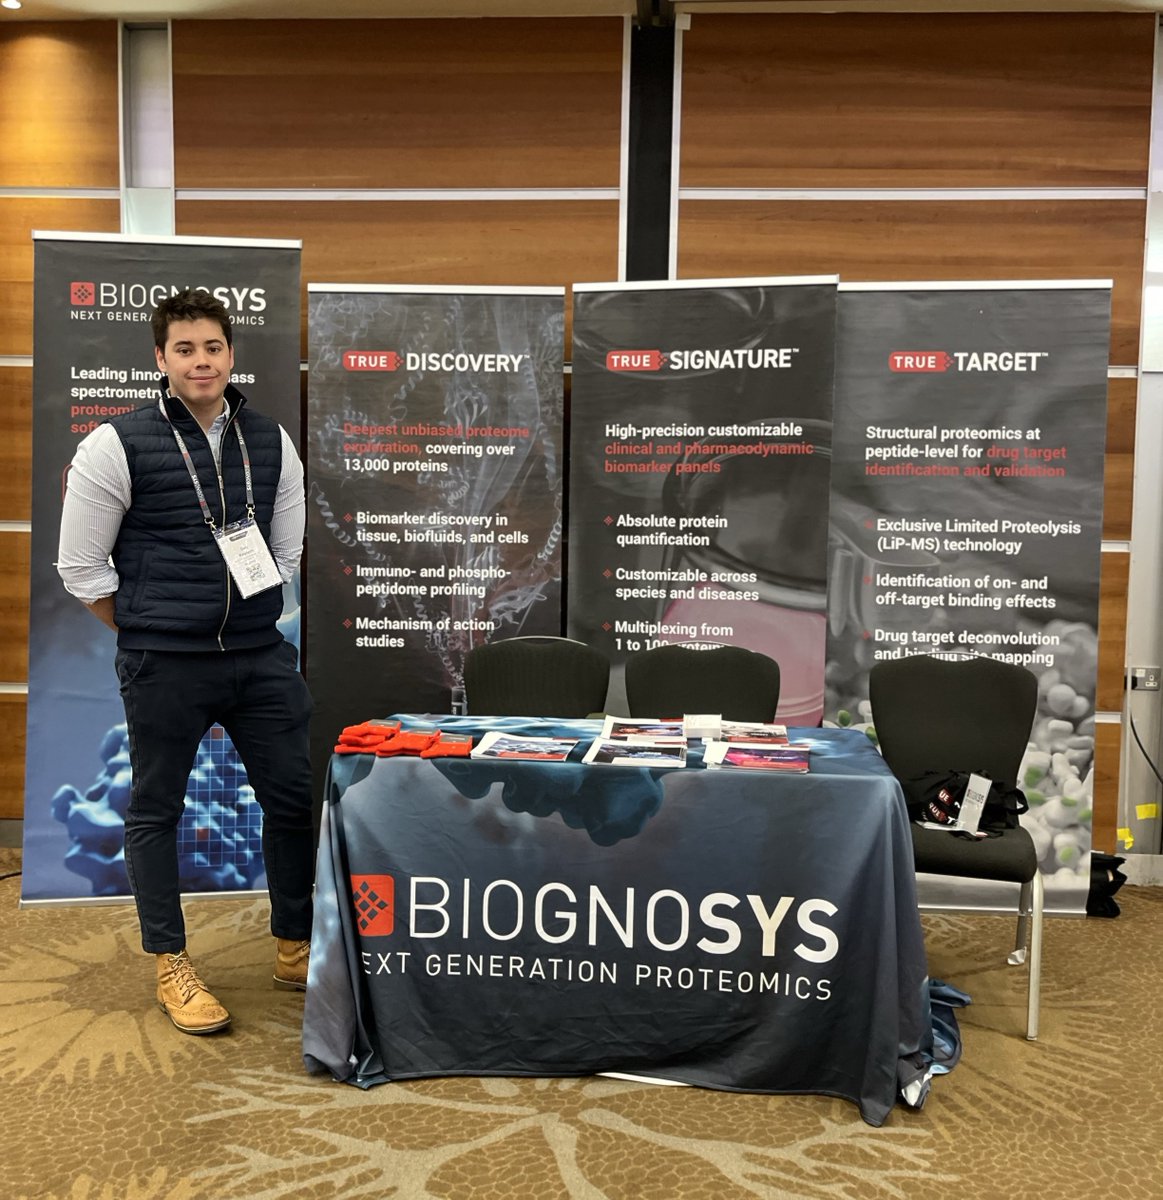 Day 1 at #Immuno24, London! Join Biognosys at booth 12 to uncover our groundbreaking #proteomics services, TrueDiscovery® & TrueSignature®. Watch out for @DanRedfern's talk on HLA I immunopeptidome profiling today at 12:10 PM. More: ow.ly/CHyl50RnNnY #OGimmuno